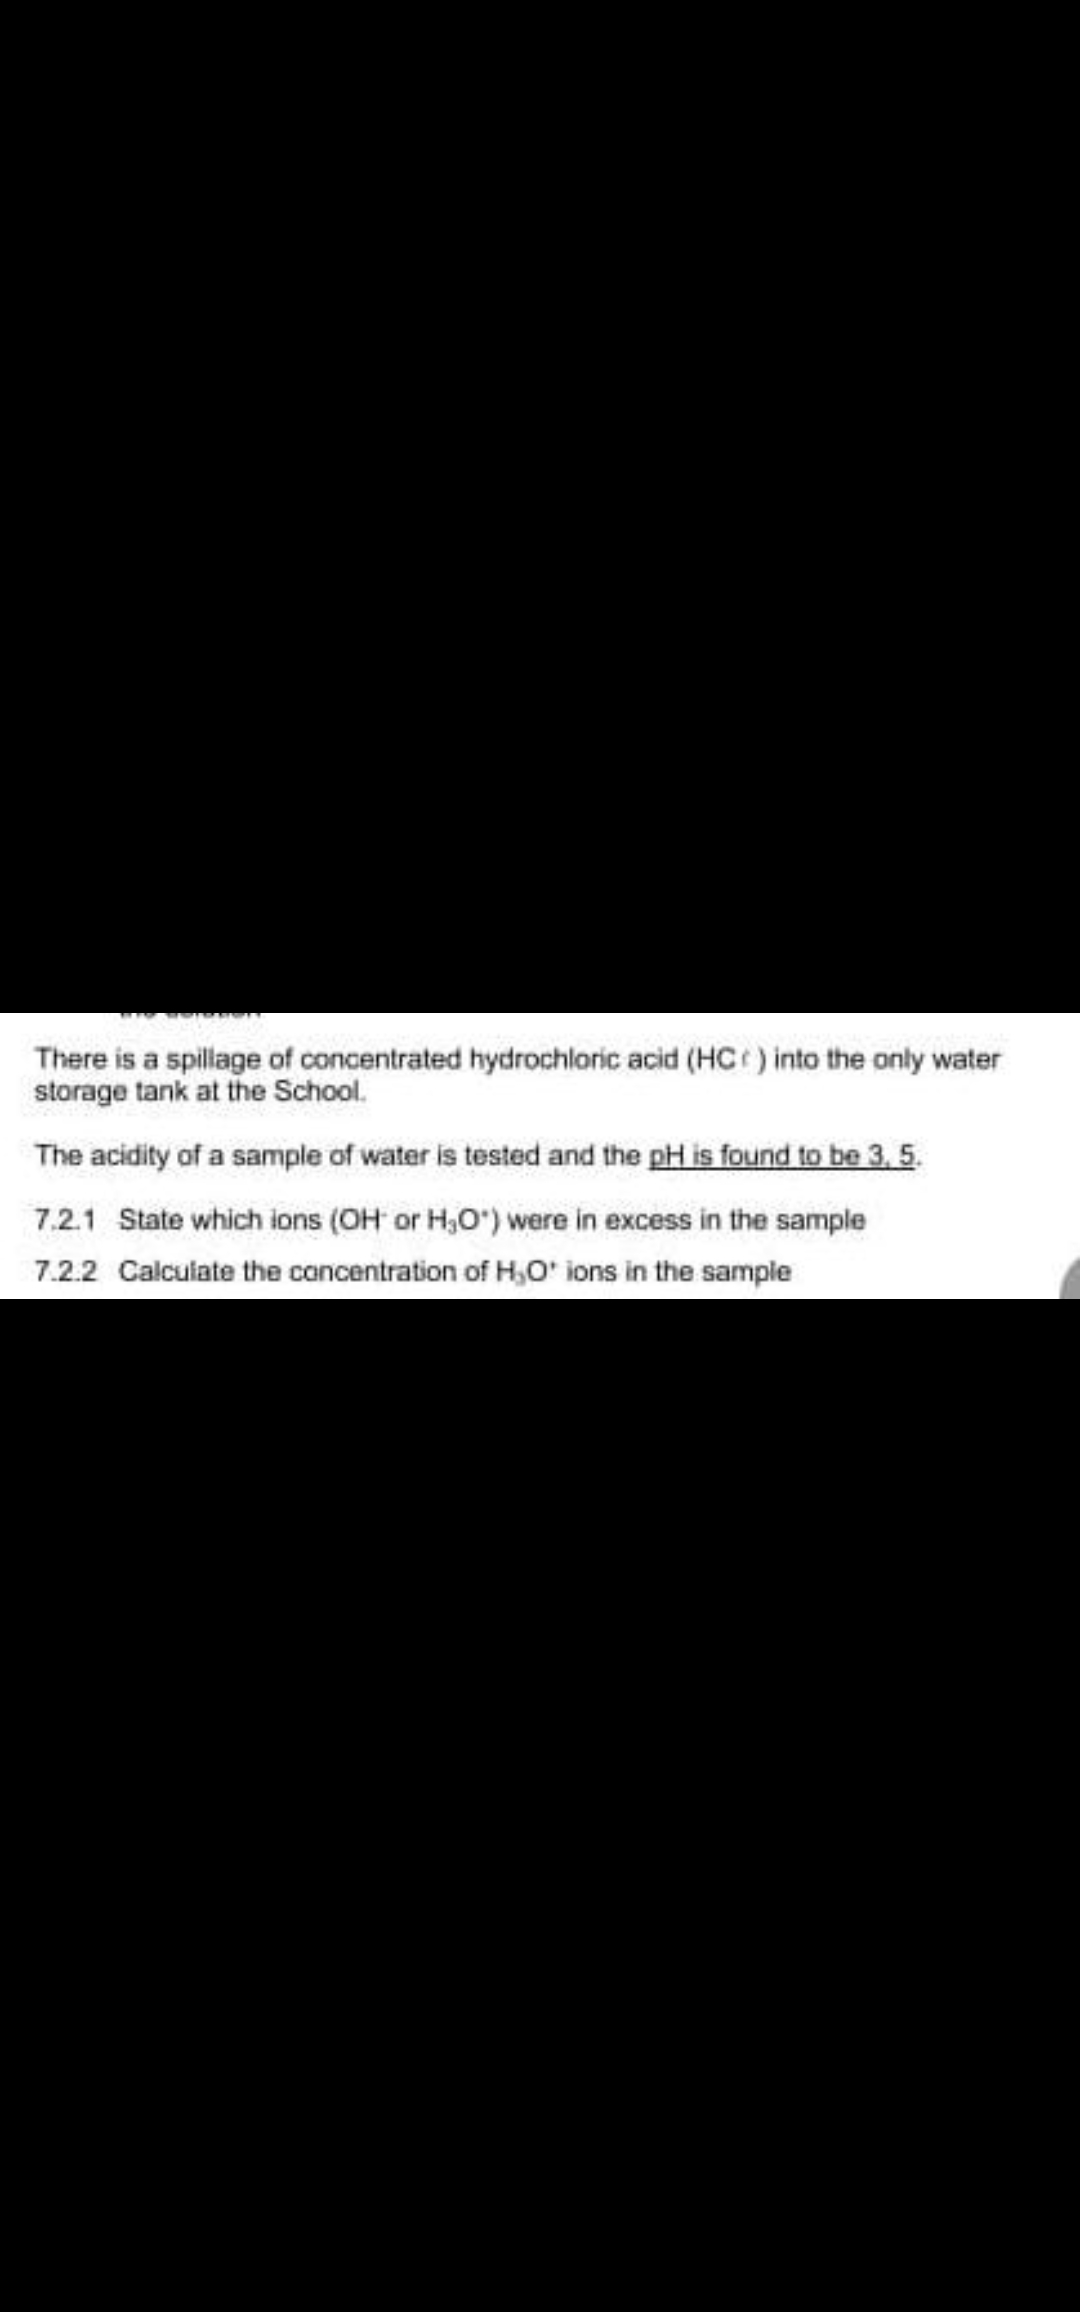 There is a spillage of concentrated hydrochloric acid (HC ) into the only water
storage tank at the School.
The acidity of a sample of water is tested and the pH is found to be 3, 5.
7.2.1 State which ions (OH or H,O") were in excess in the sample
7.2.2 Calculate the concentration of H,O' ions in the sample
